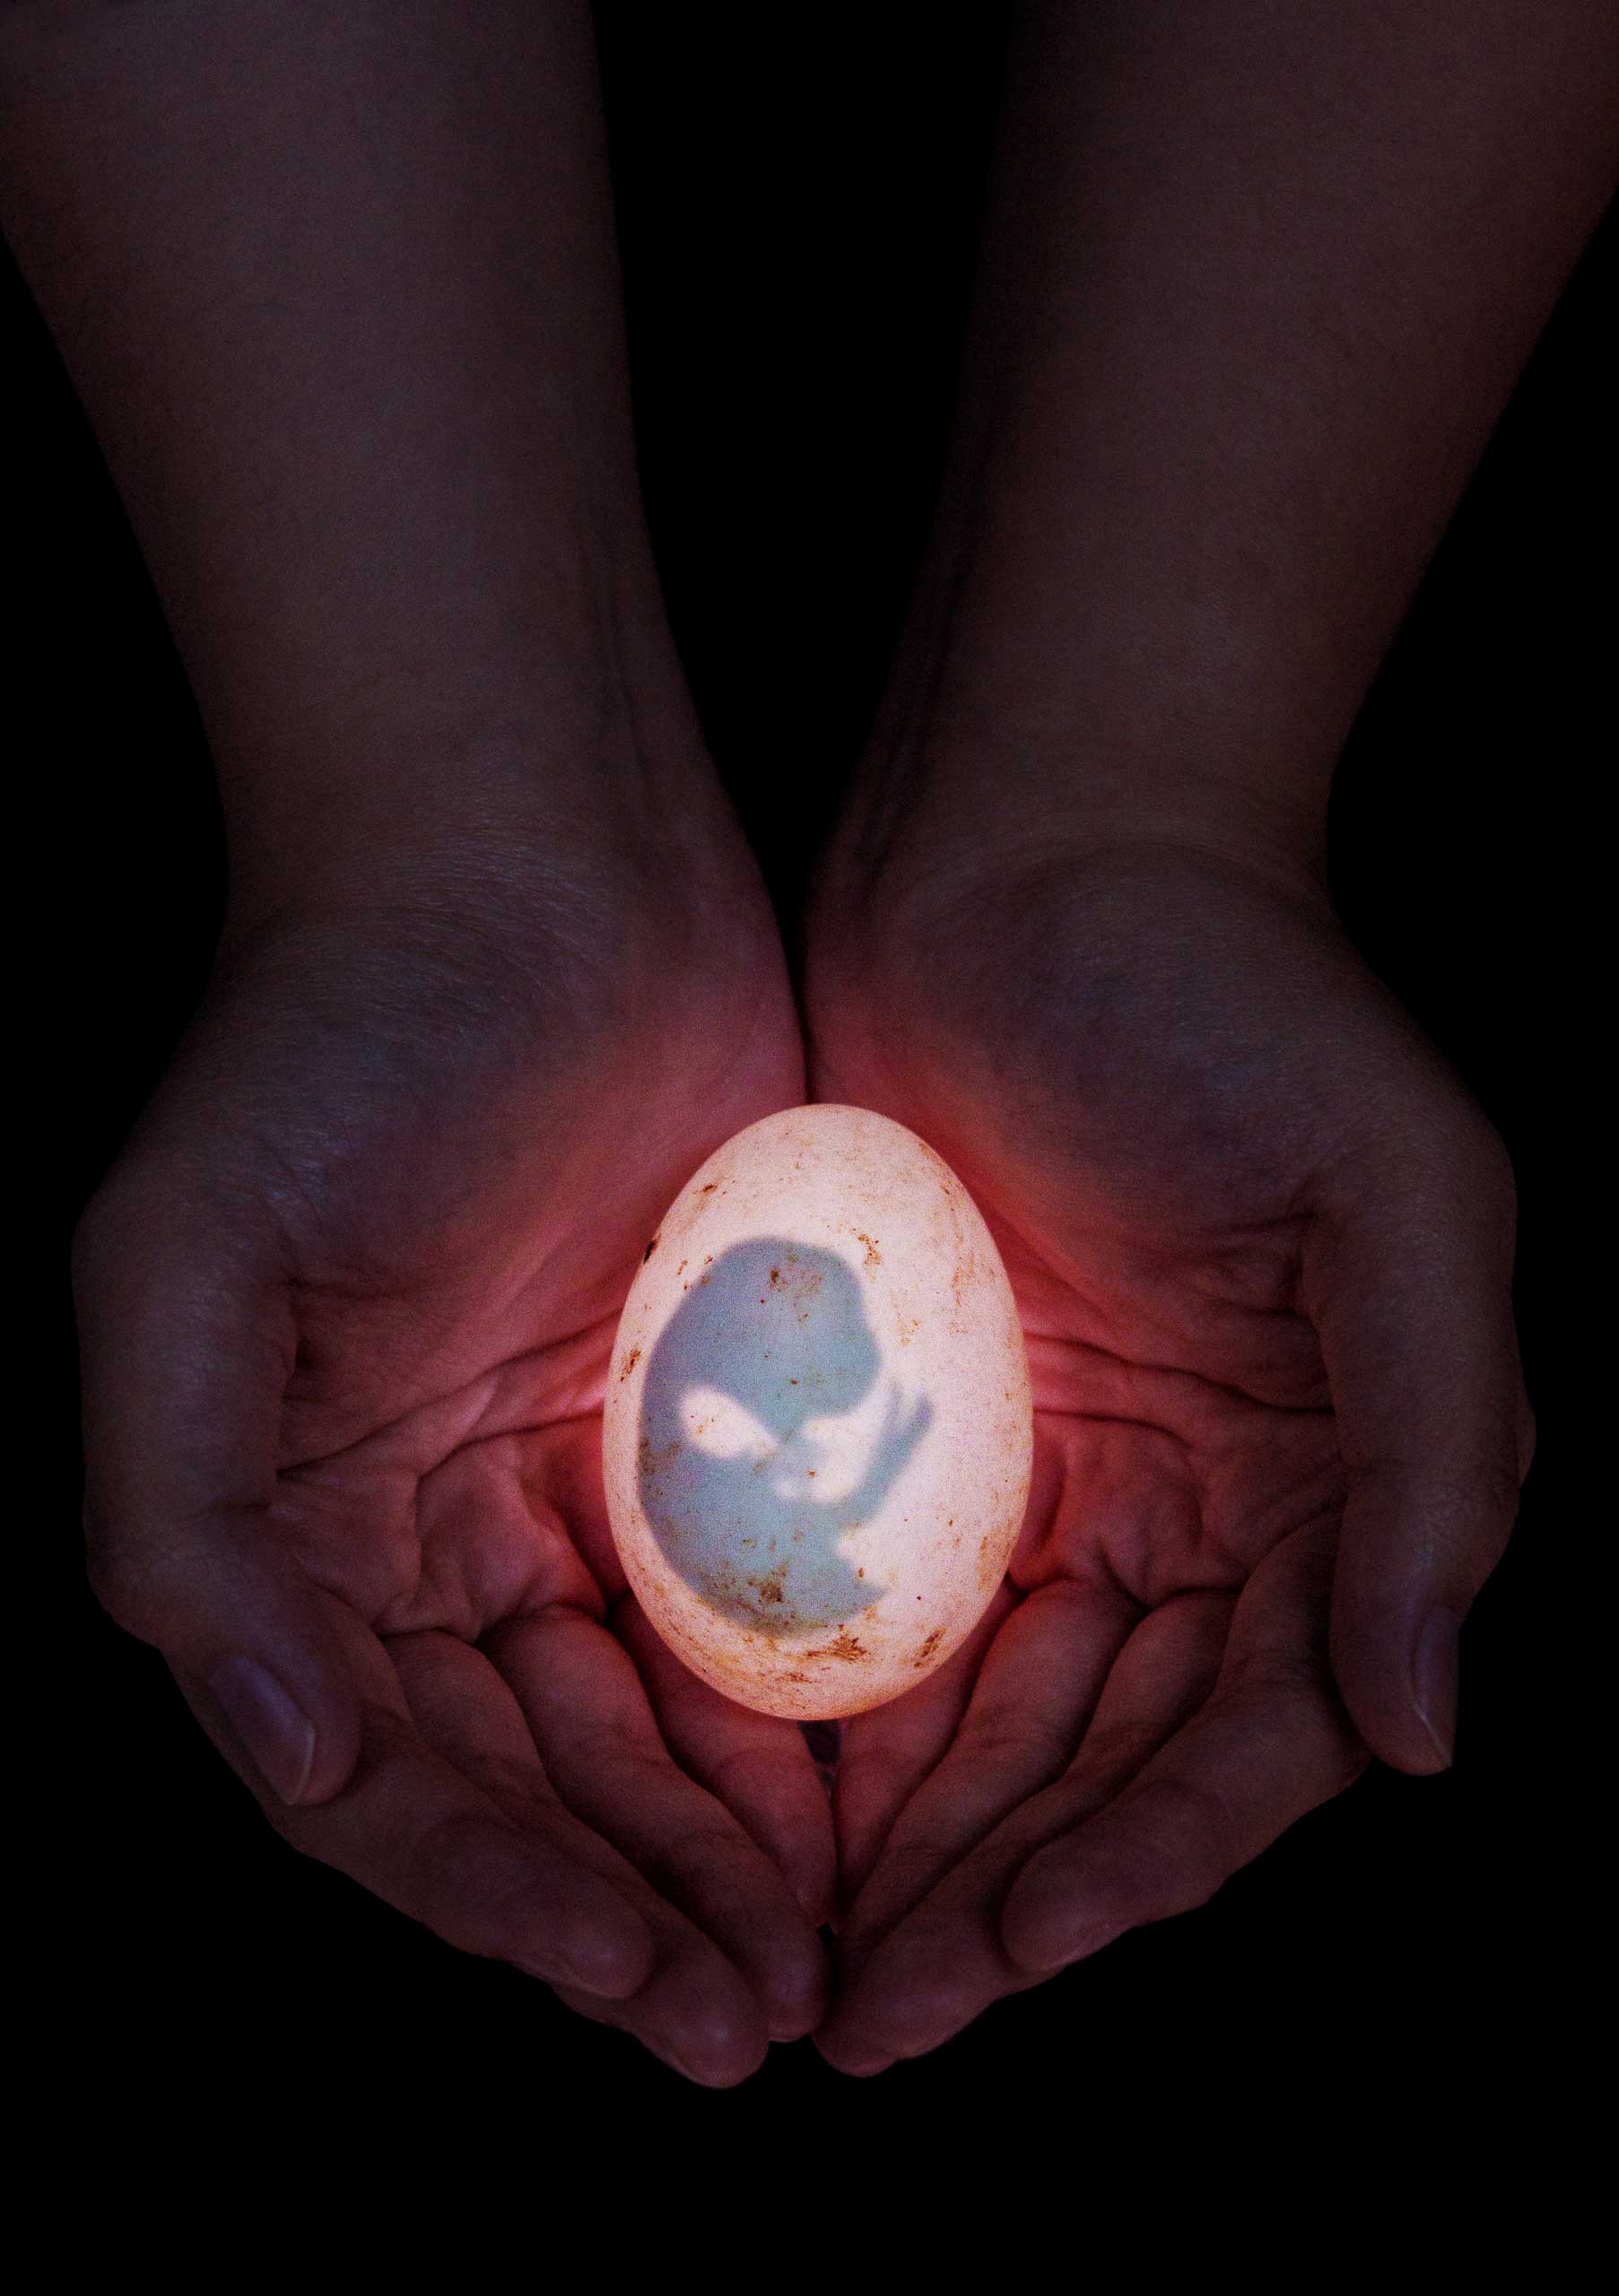 A chick embryo in a hardened eggshell is sustained until full development in Rizal, The Philippines.